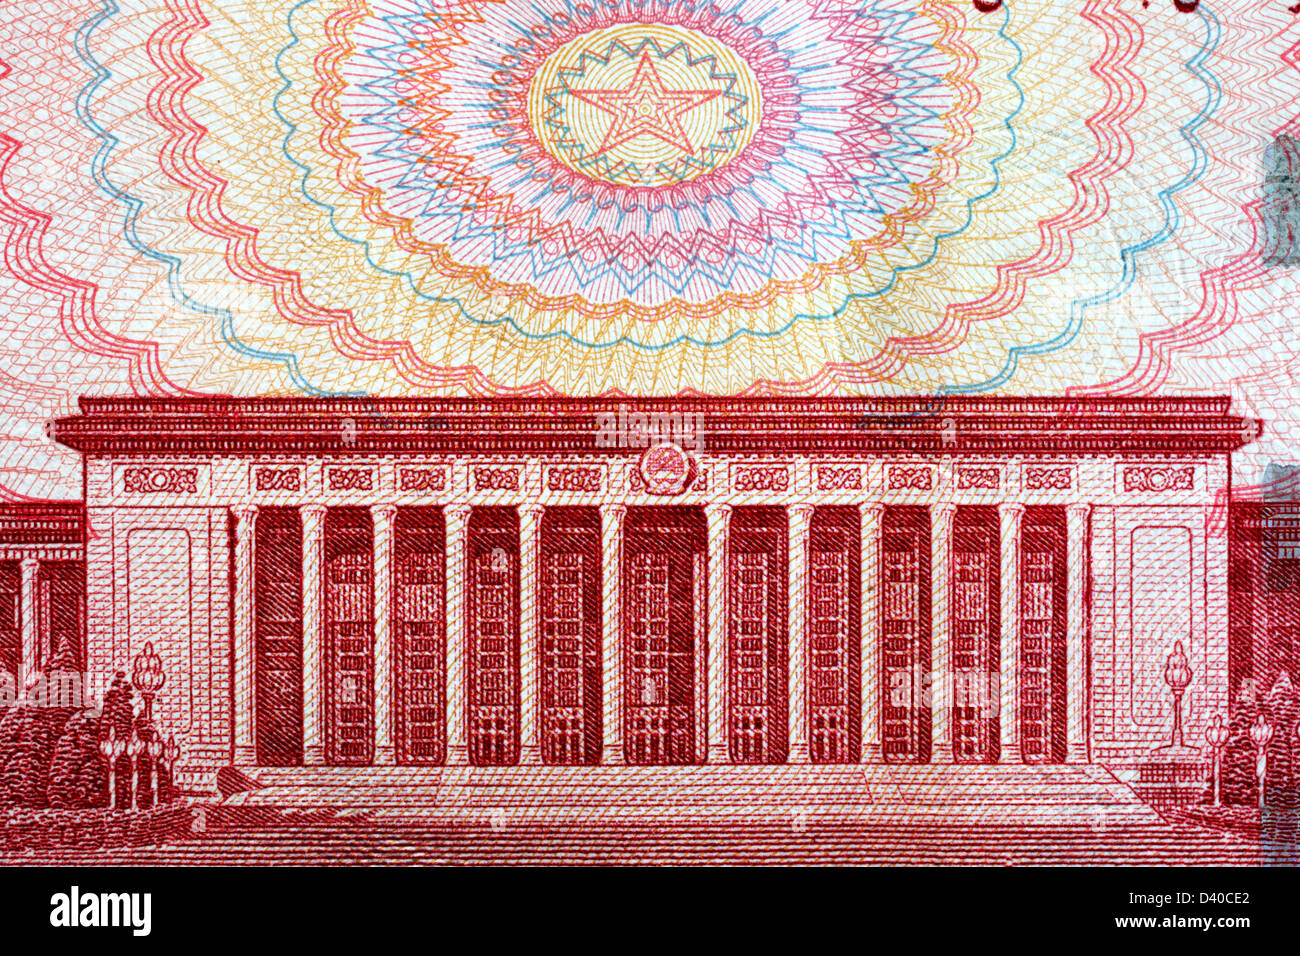 Great Hall of the People at Tiananmen Square in Beijing from 100 Yuan banknote, China, 2005 Stock Photo